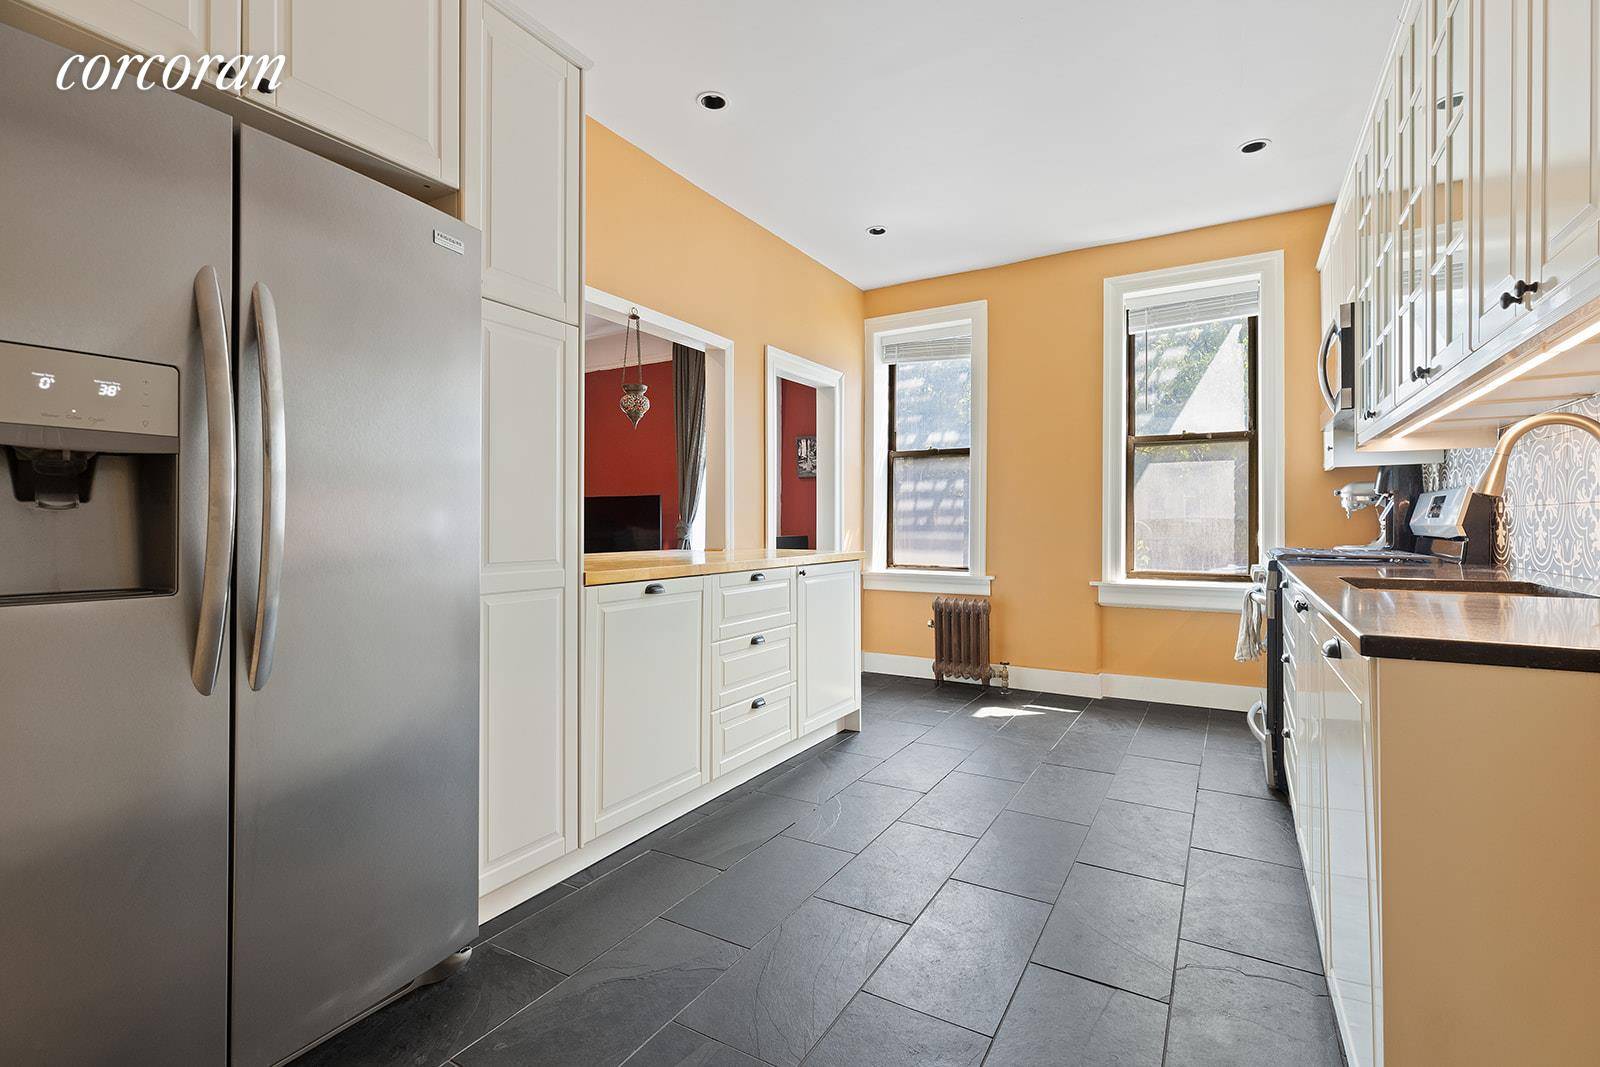 Exceptional opportunity awaits at this nearly 800 Sq ft one bedroom coop perfectly located in the heart of Crown Heights, right in the historic sub section known as Weeksville.